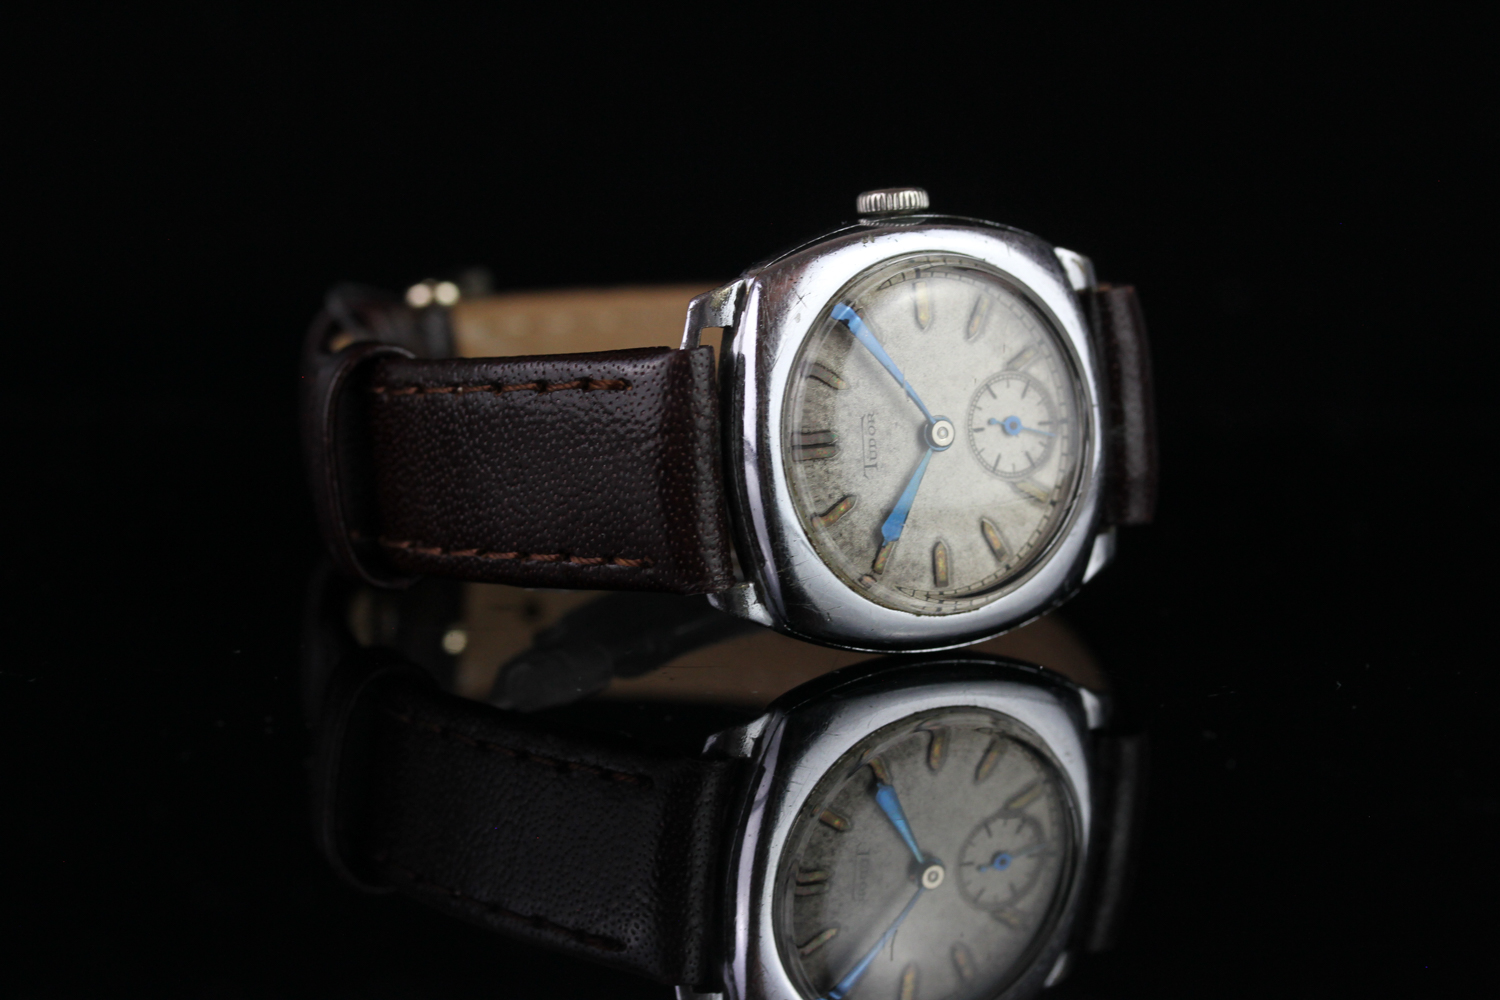 MID-SIZE ROLEX TUDOR CIRCA 1930,cushion shape,white dial with blue hands,silver markers, sub dial - Image 3 of 4